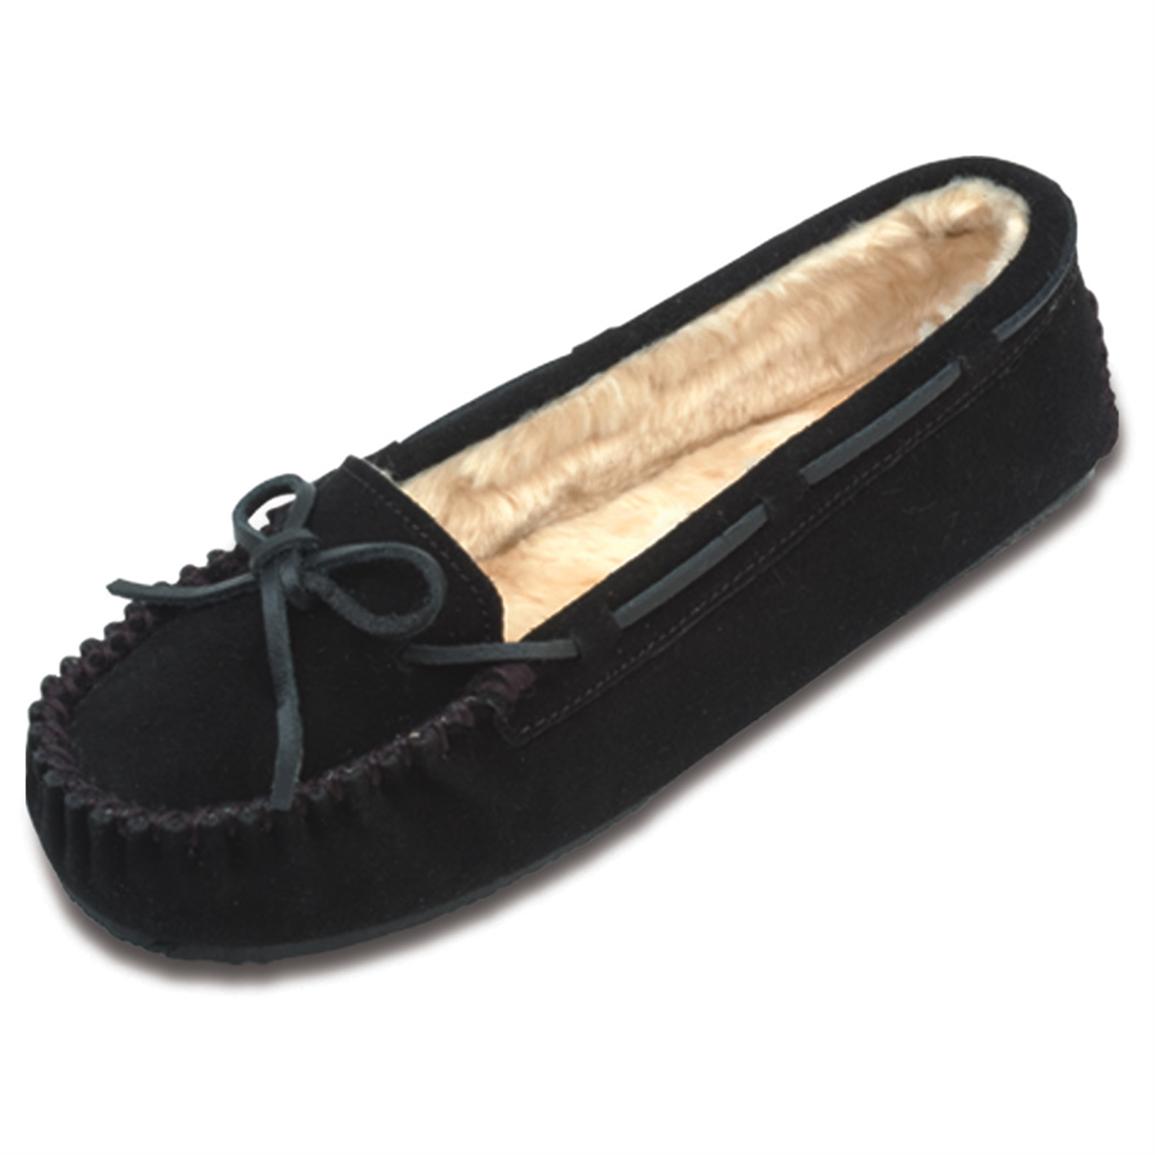 black moccasin slippers womens